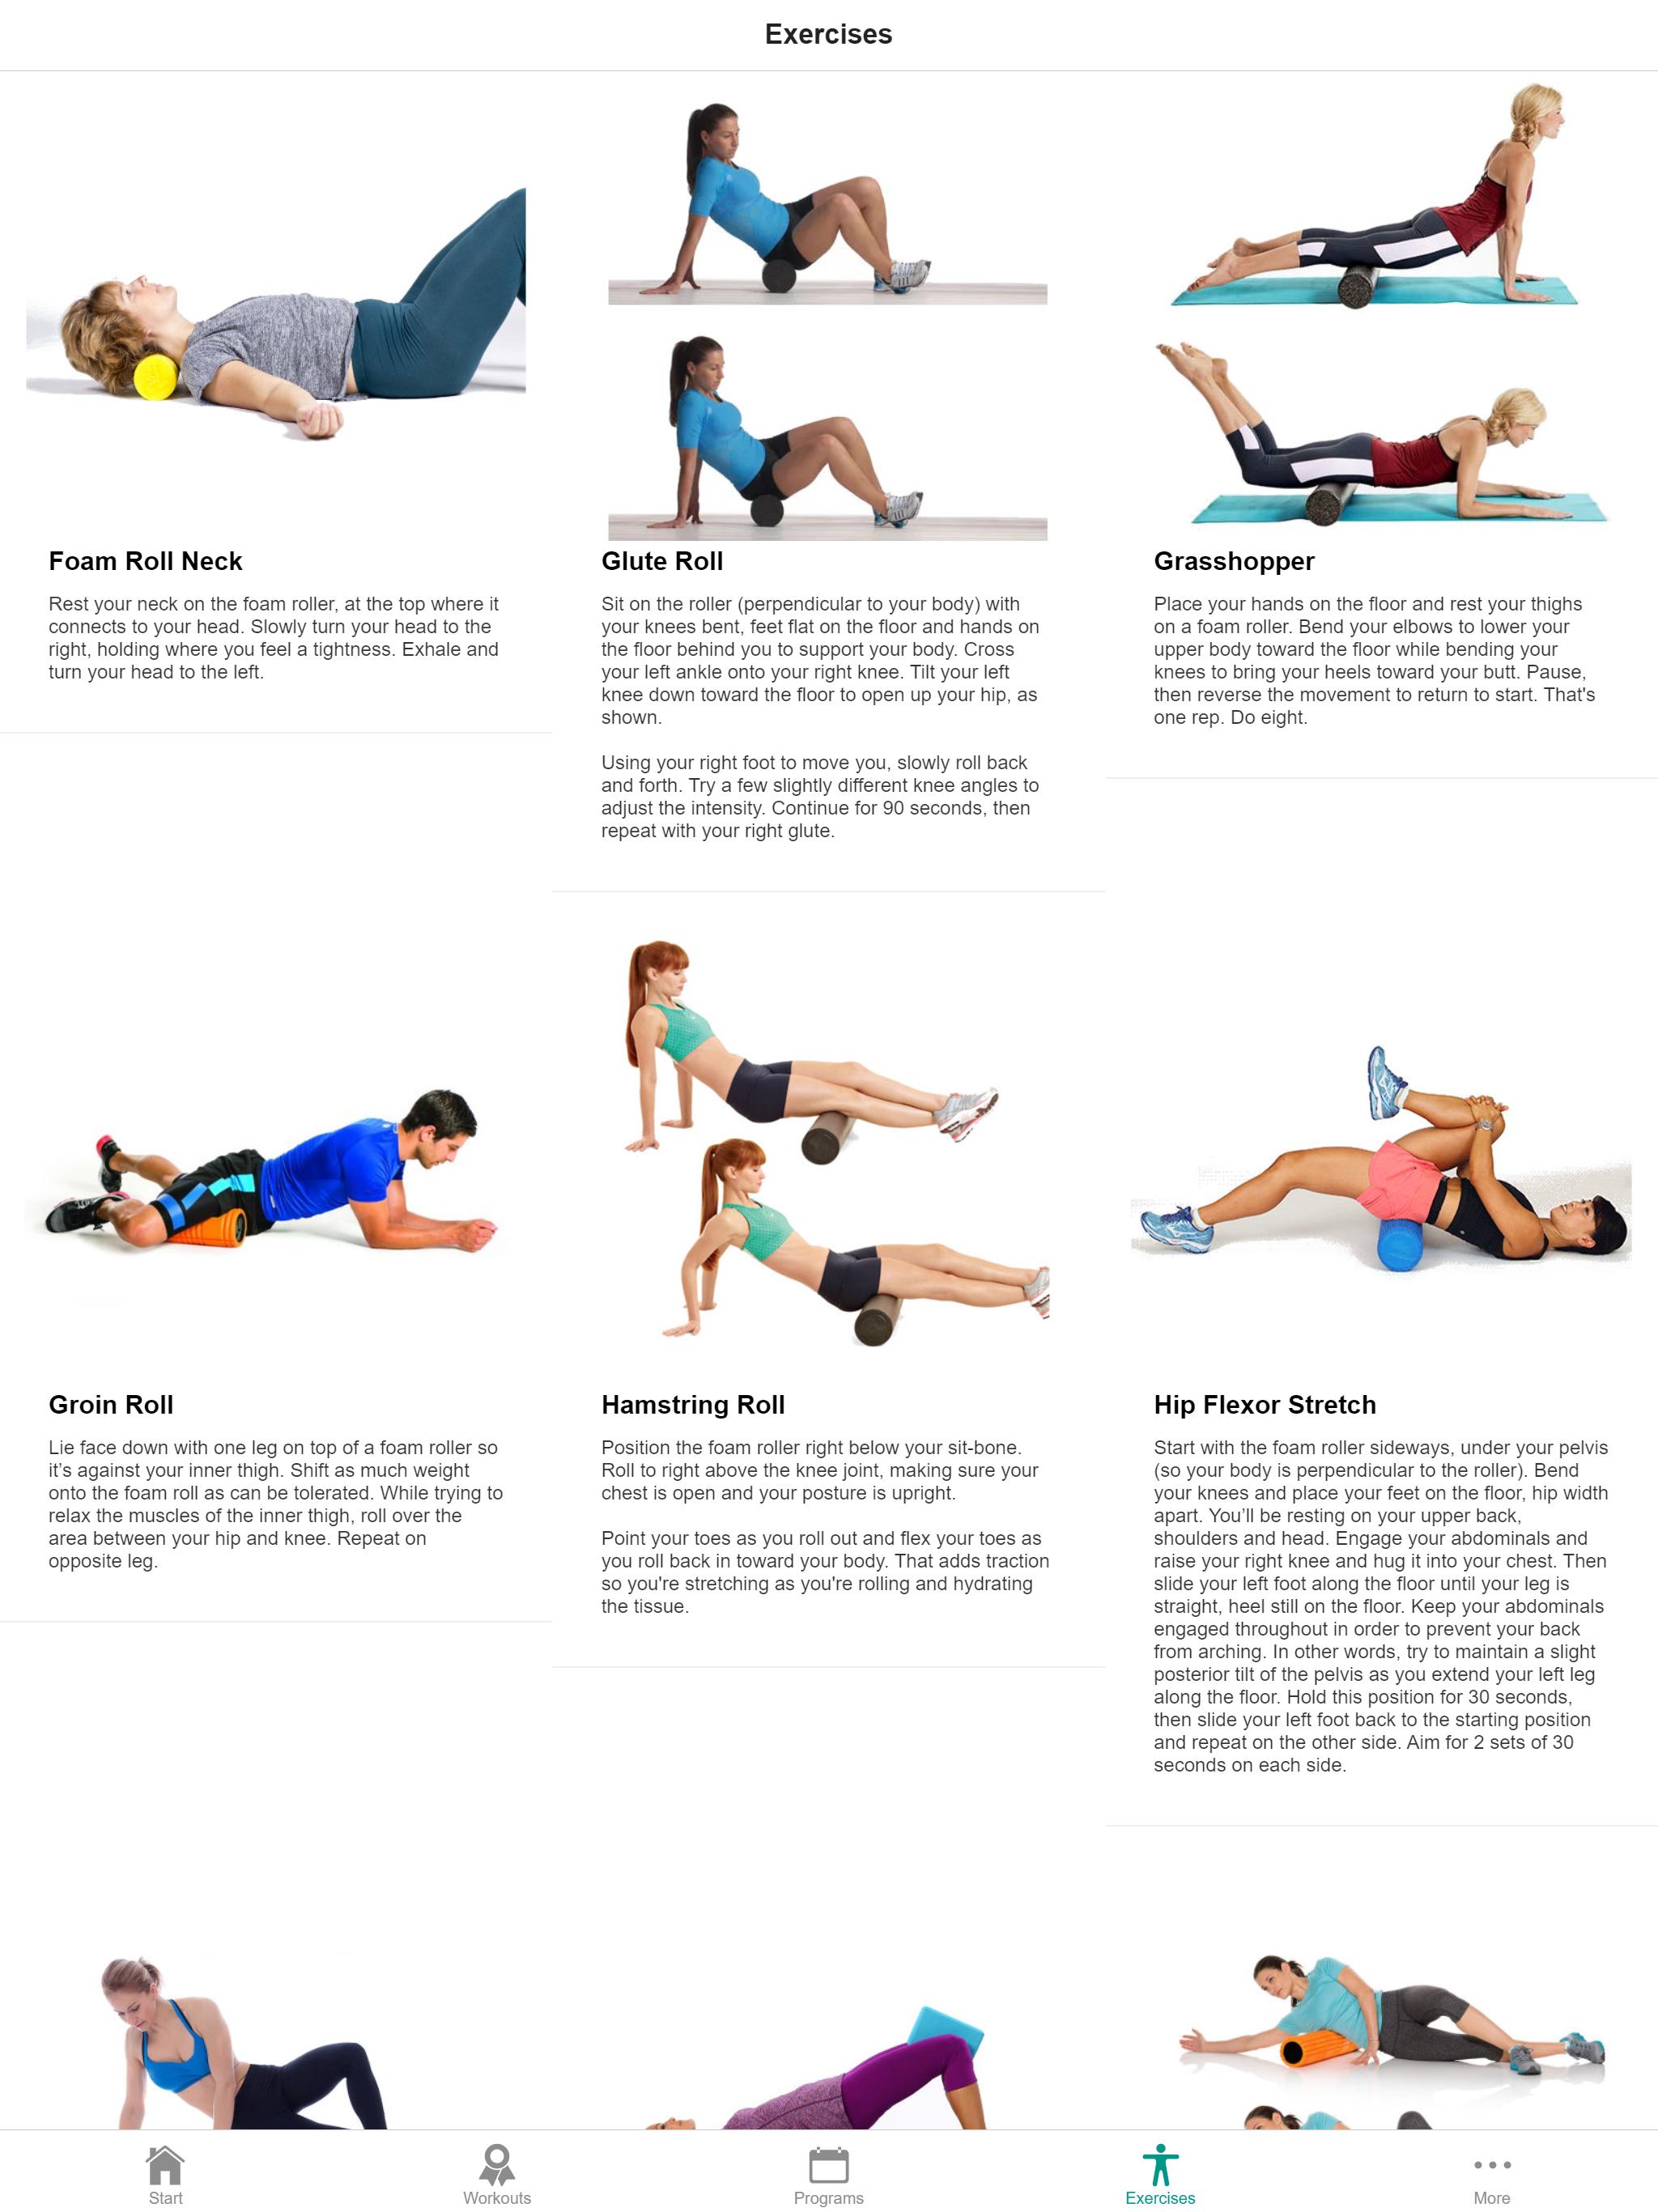 Foam Roller Exercises for Android - APK Download